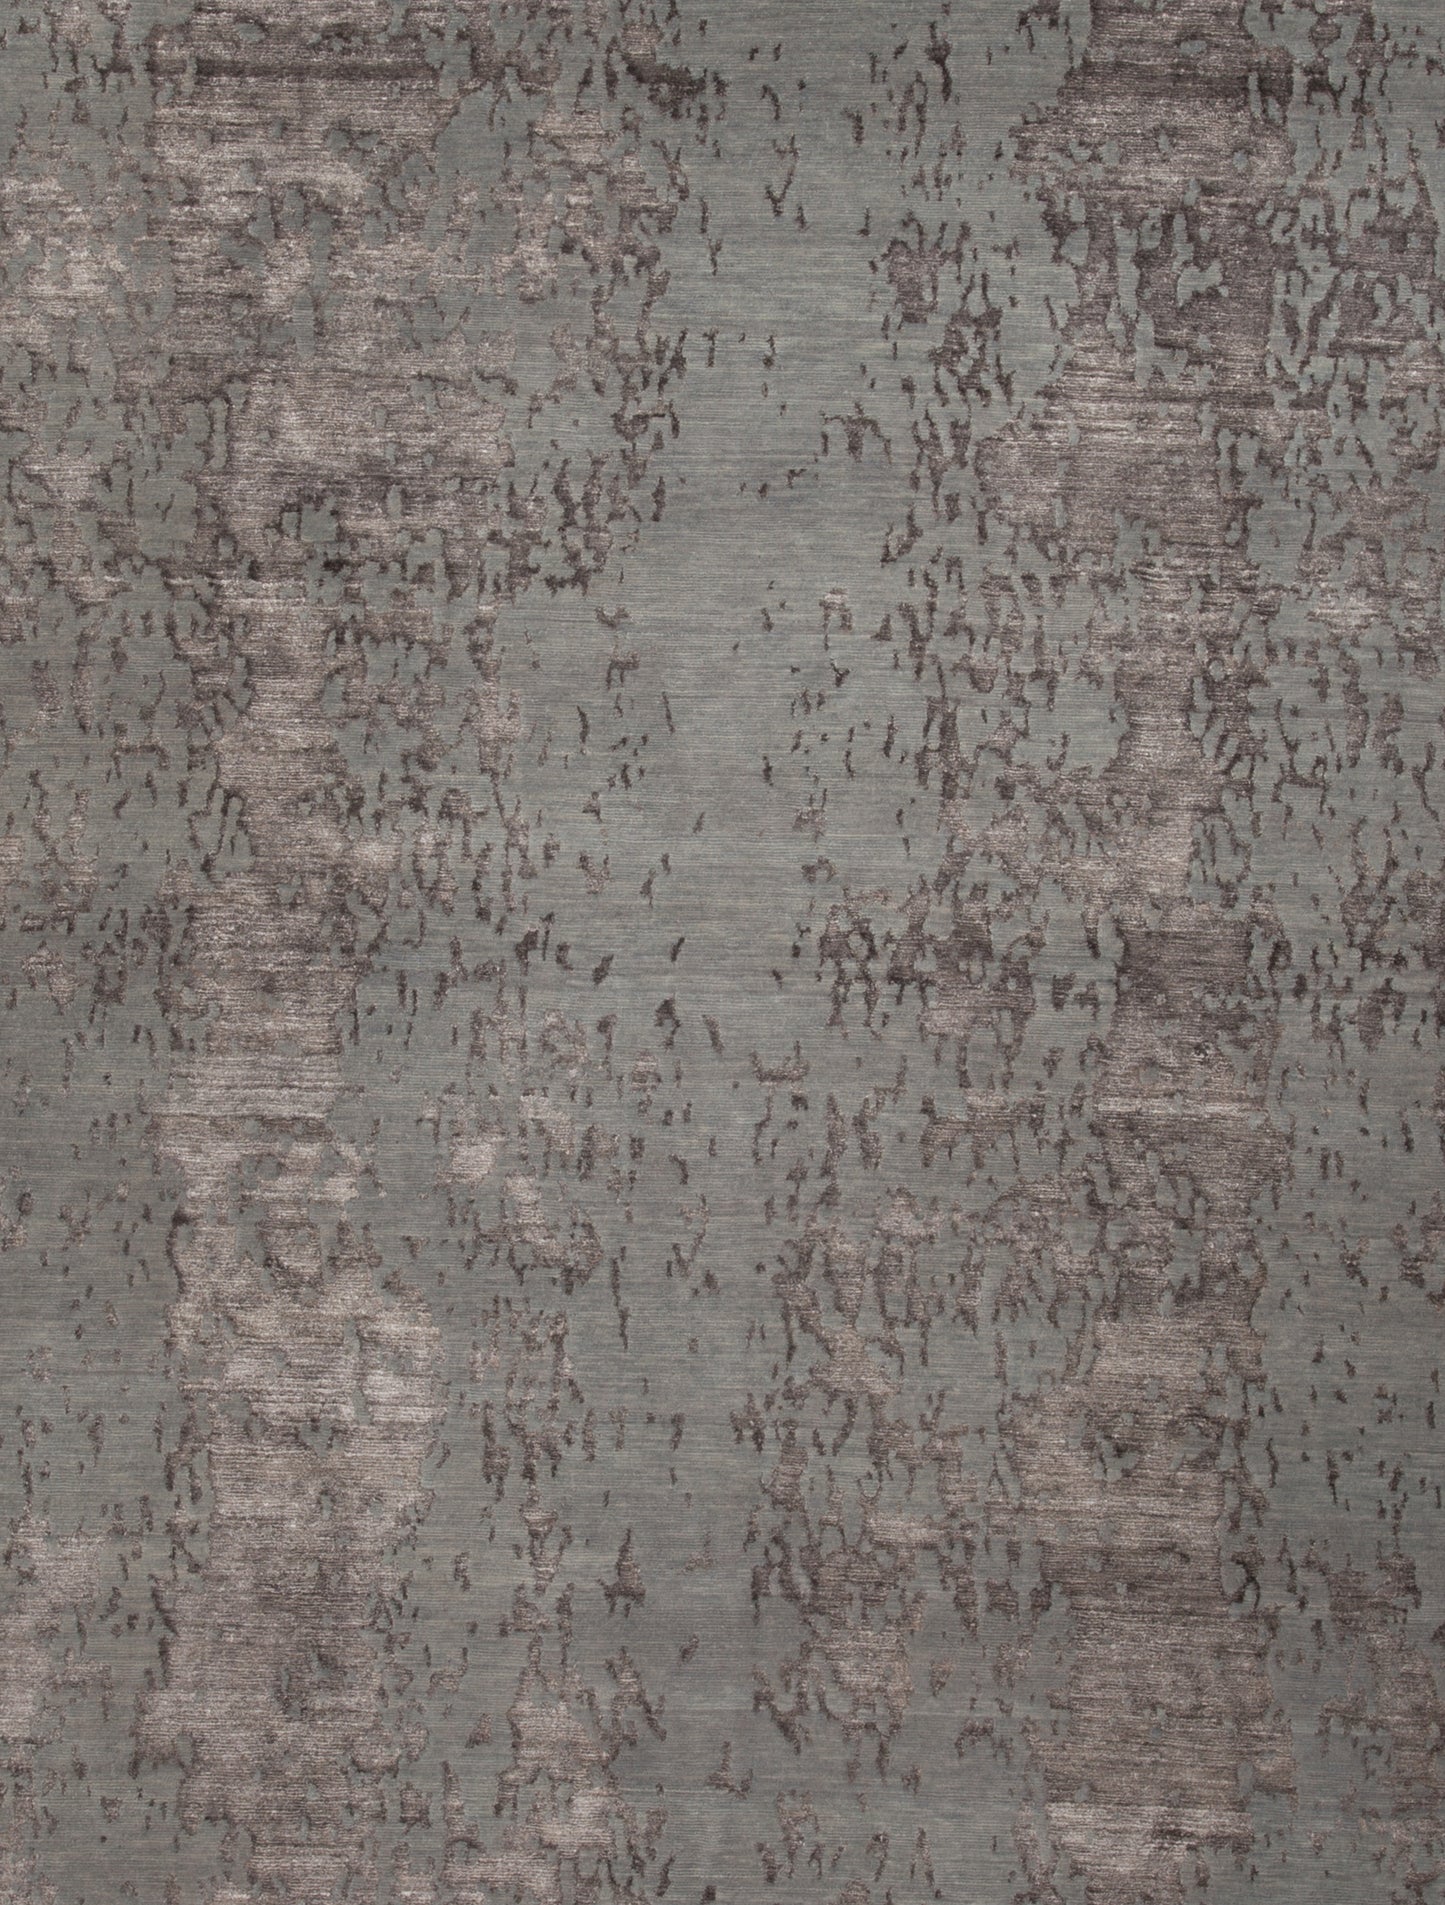 The close-up of this rug shows the texture in different tones of brown.